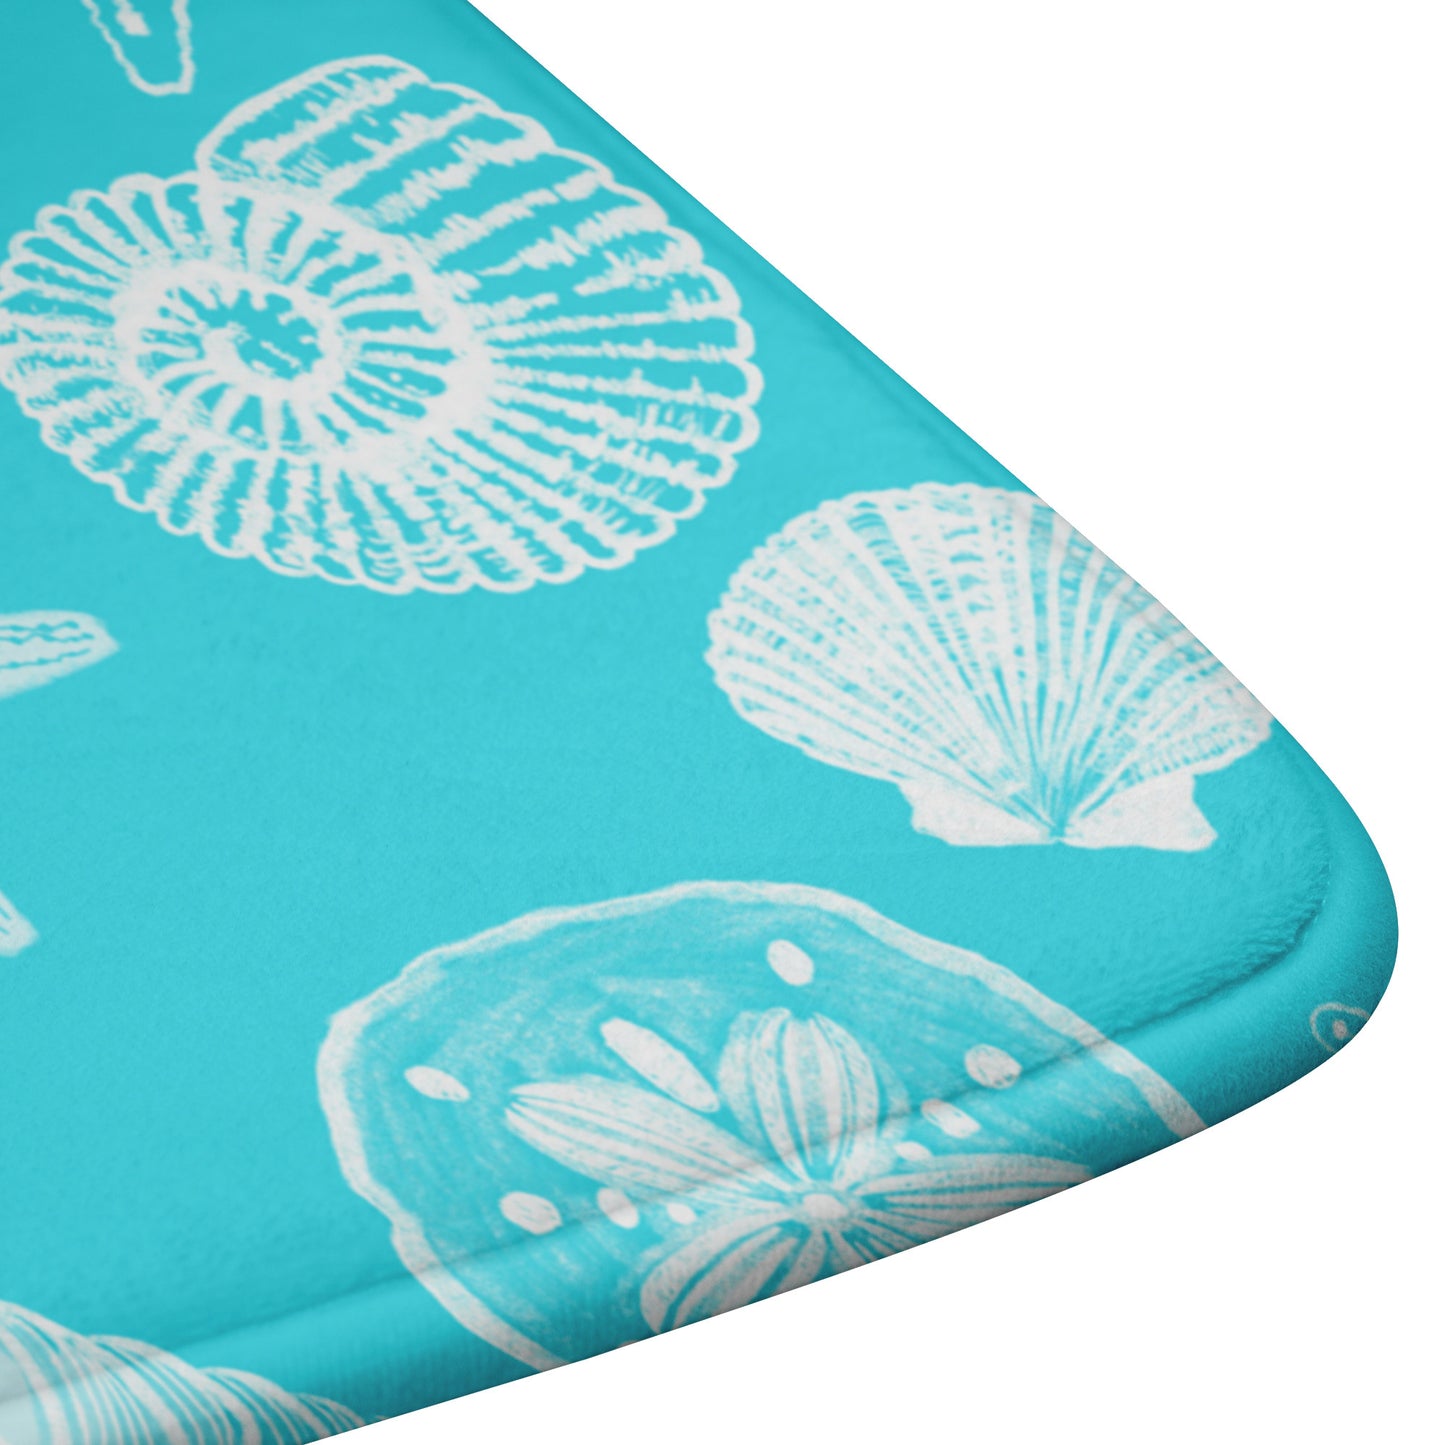 Seashell Sketches on Tropical Blue Background, Bath Mats